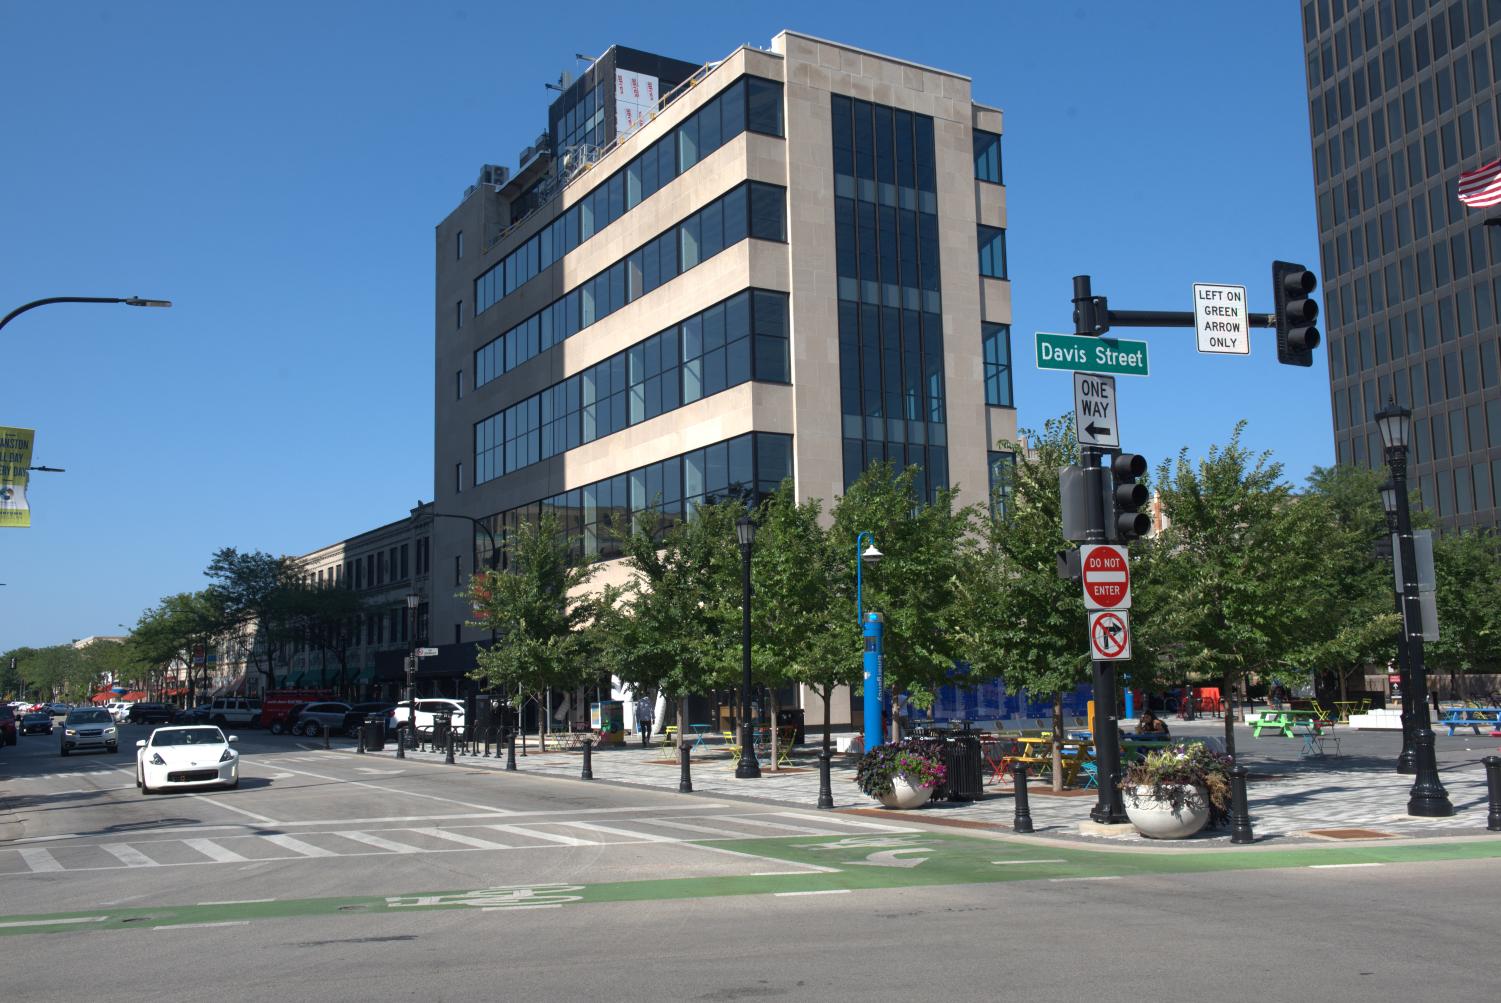 11-facts-about-prominent-industries-and-economic-development-in-evanston-illinois